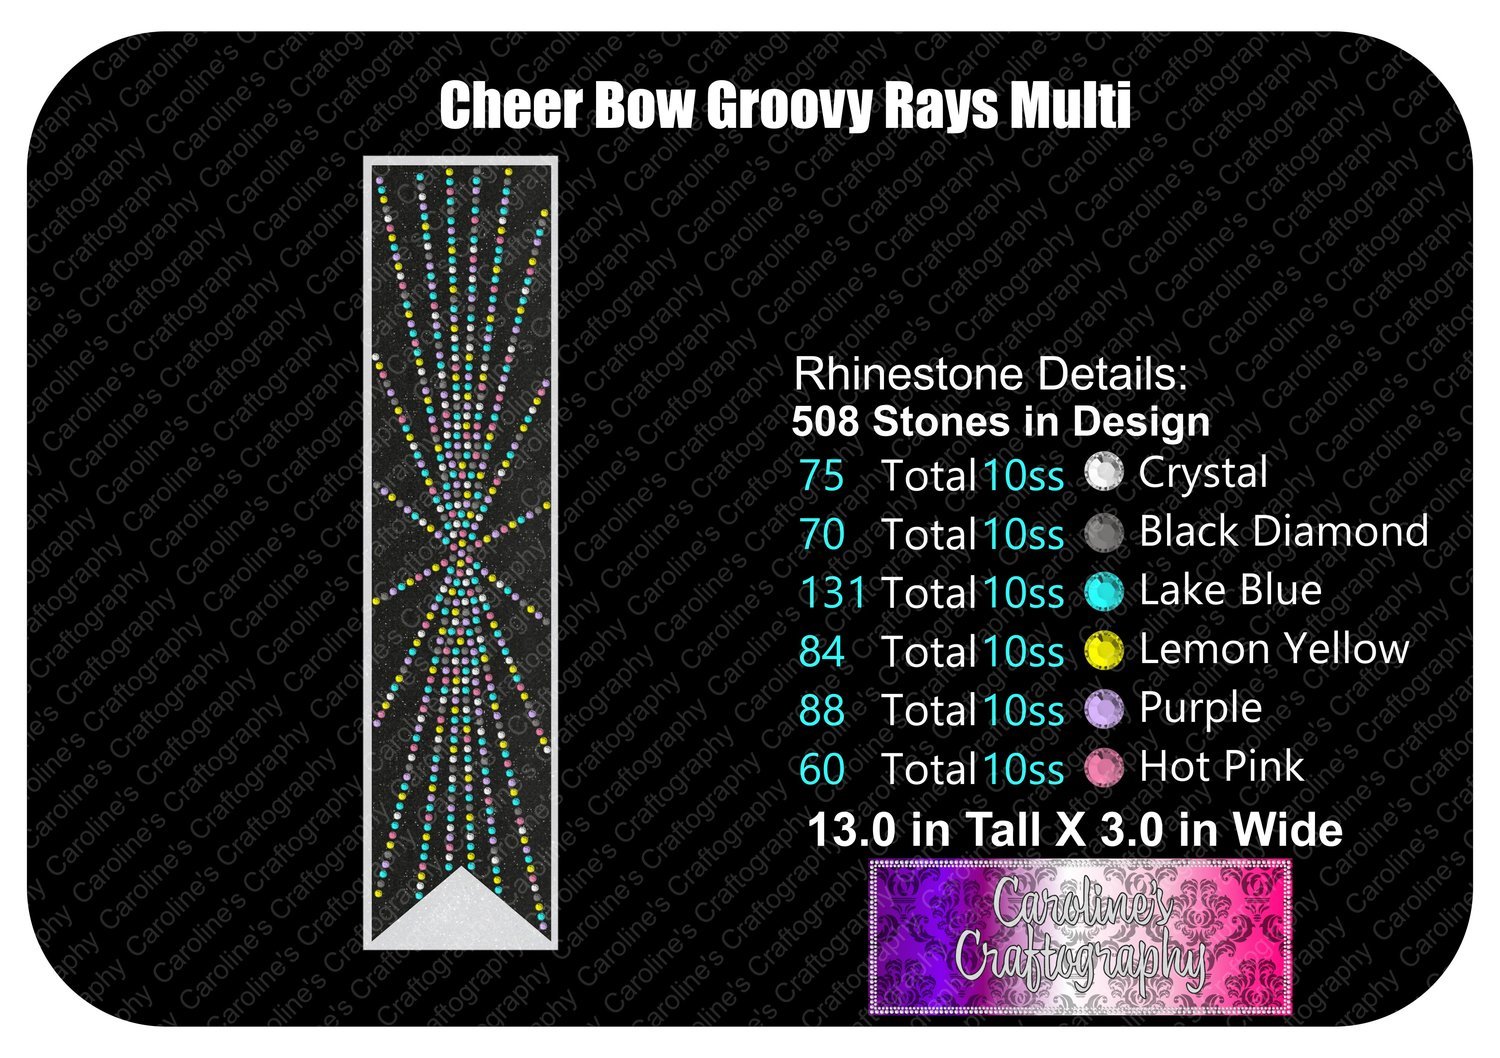 Groovy Rays 3in Cheer Bow Multi Color Stone